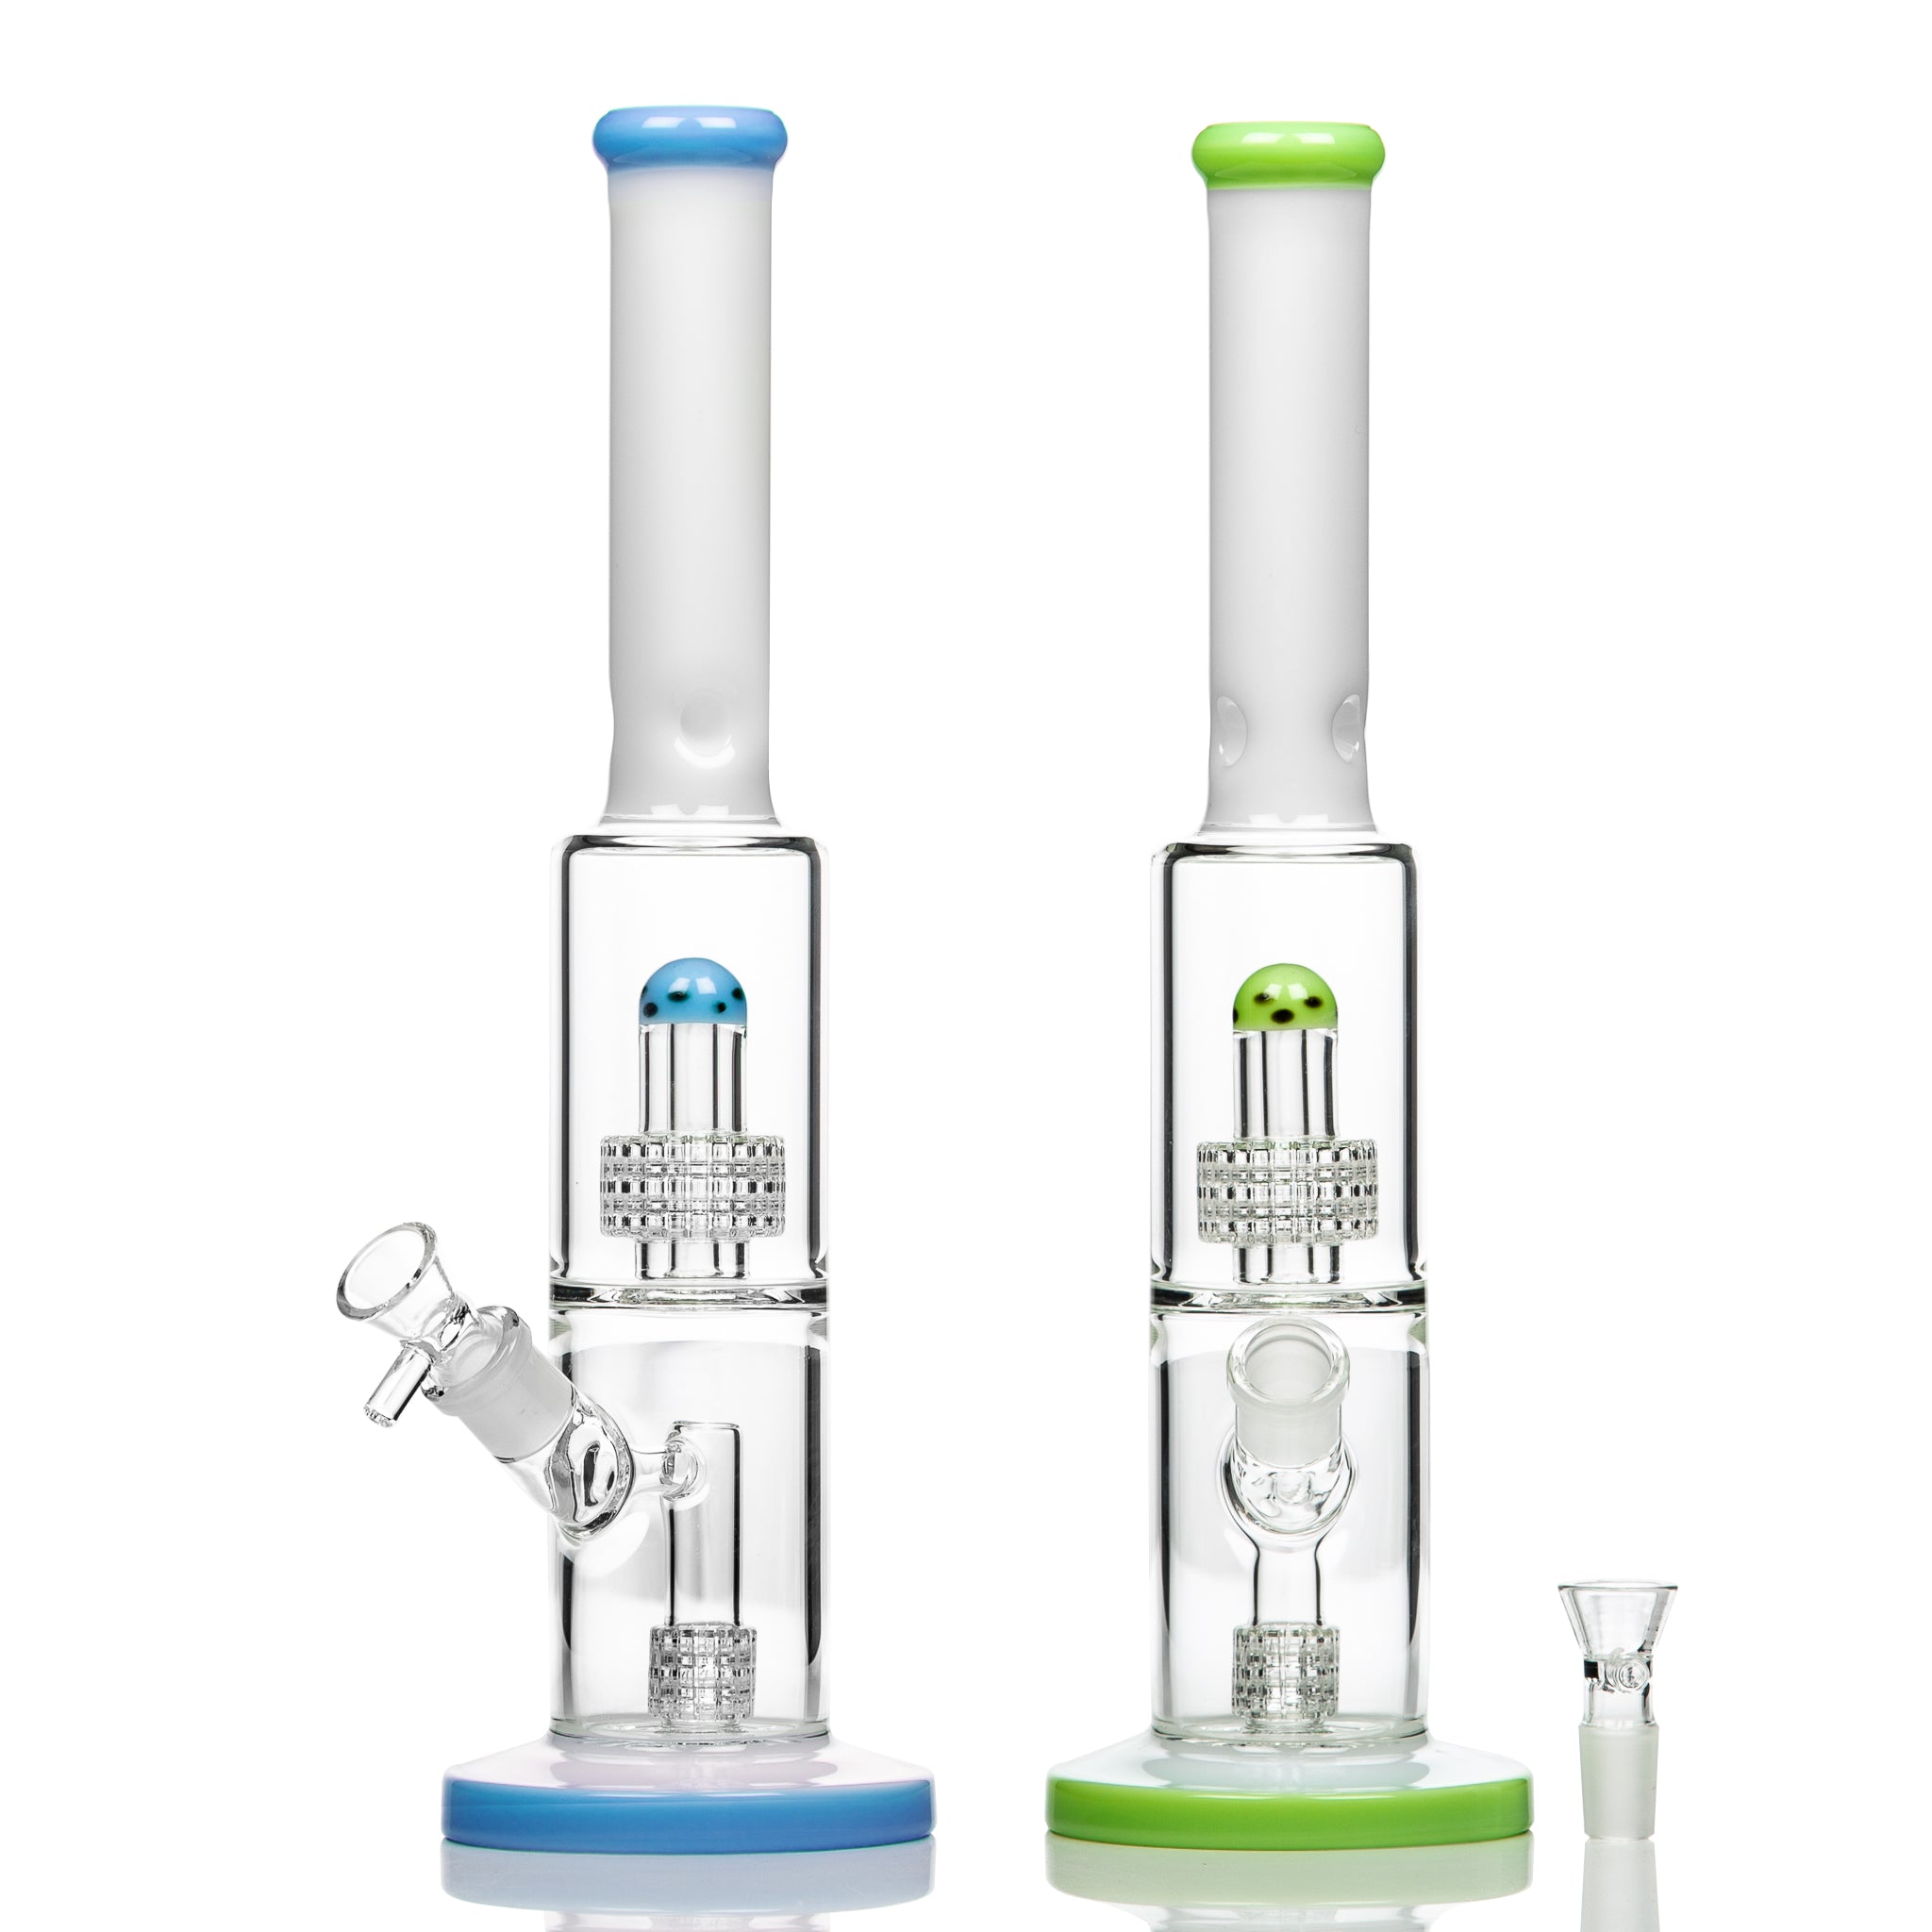 Straight bongs with twin percolators for use with legal medical cannabis in Australia.